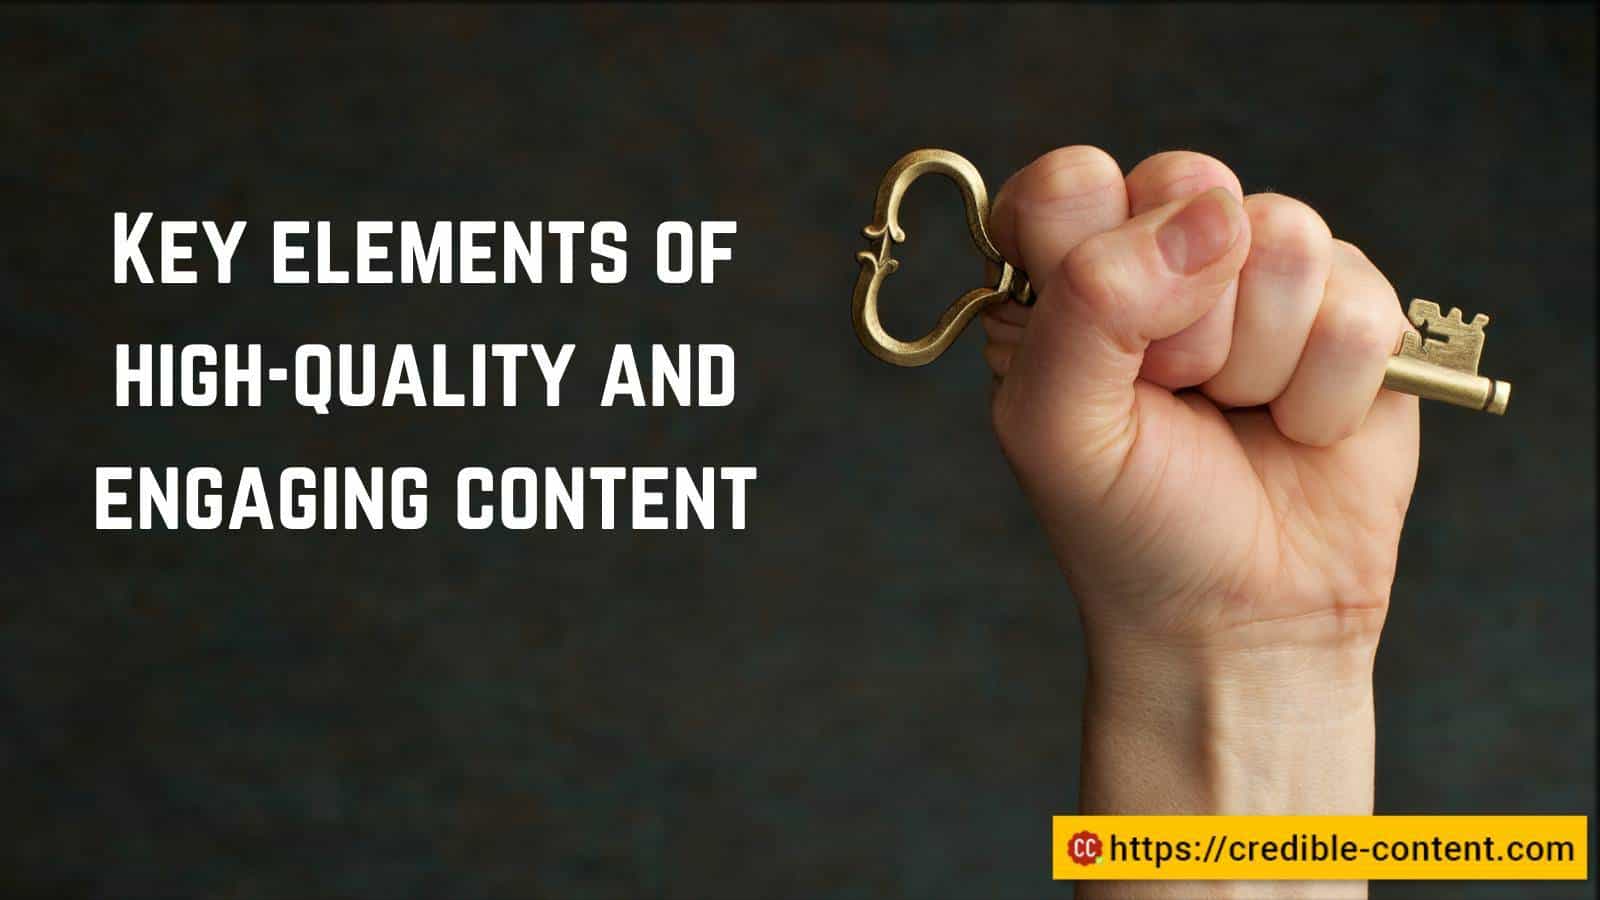 Key elements of high-quality and engaging content